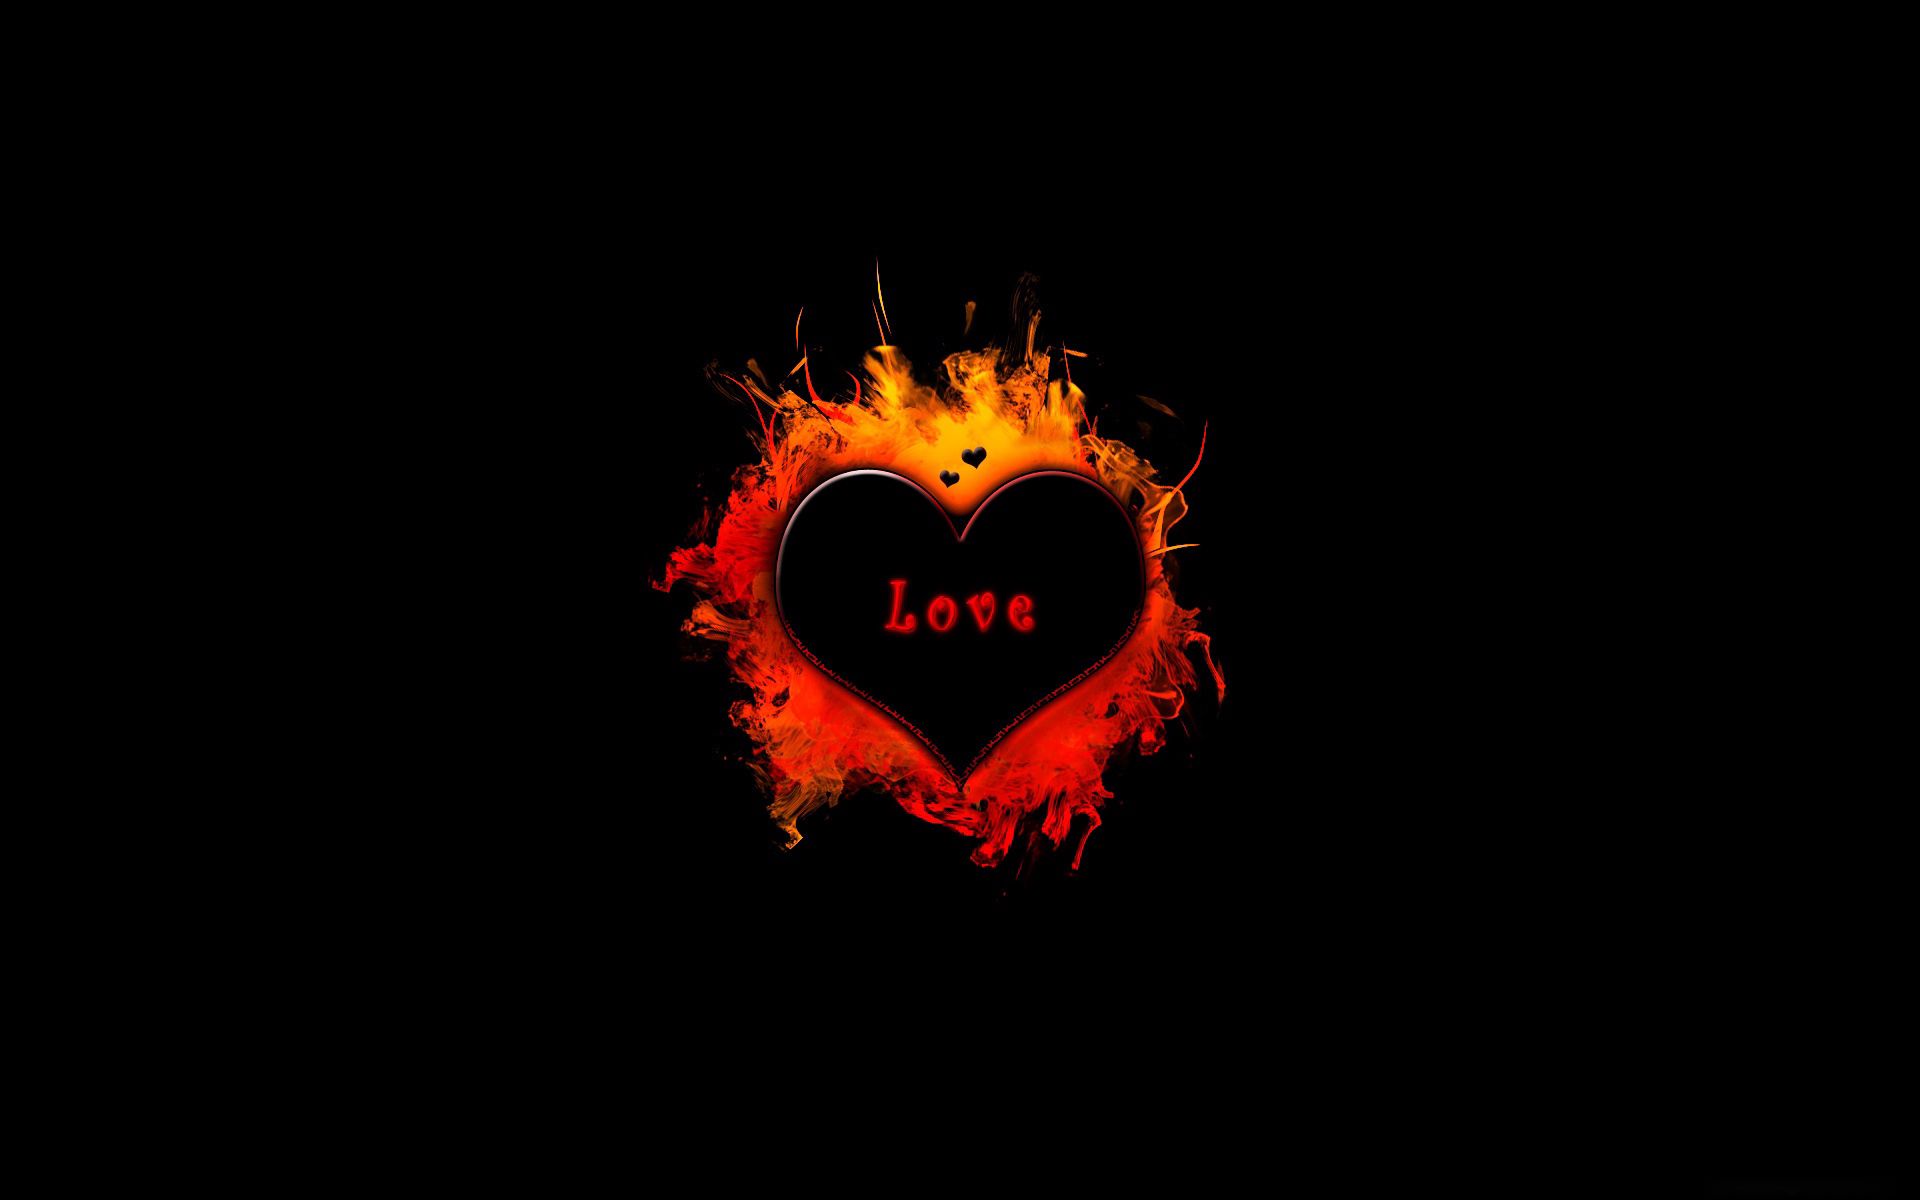 shadow, heart, love, flame, fire High Definition image